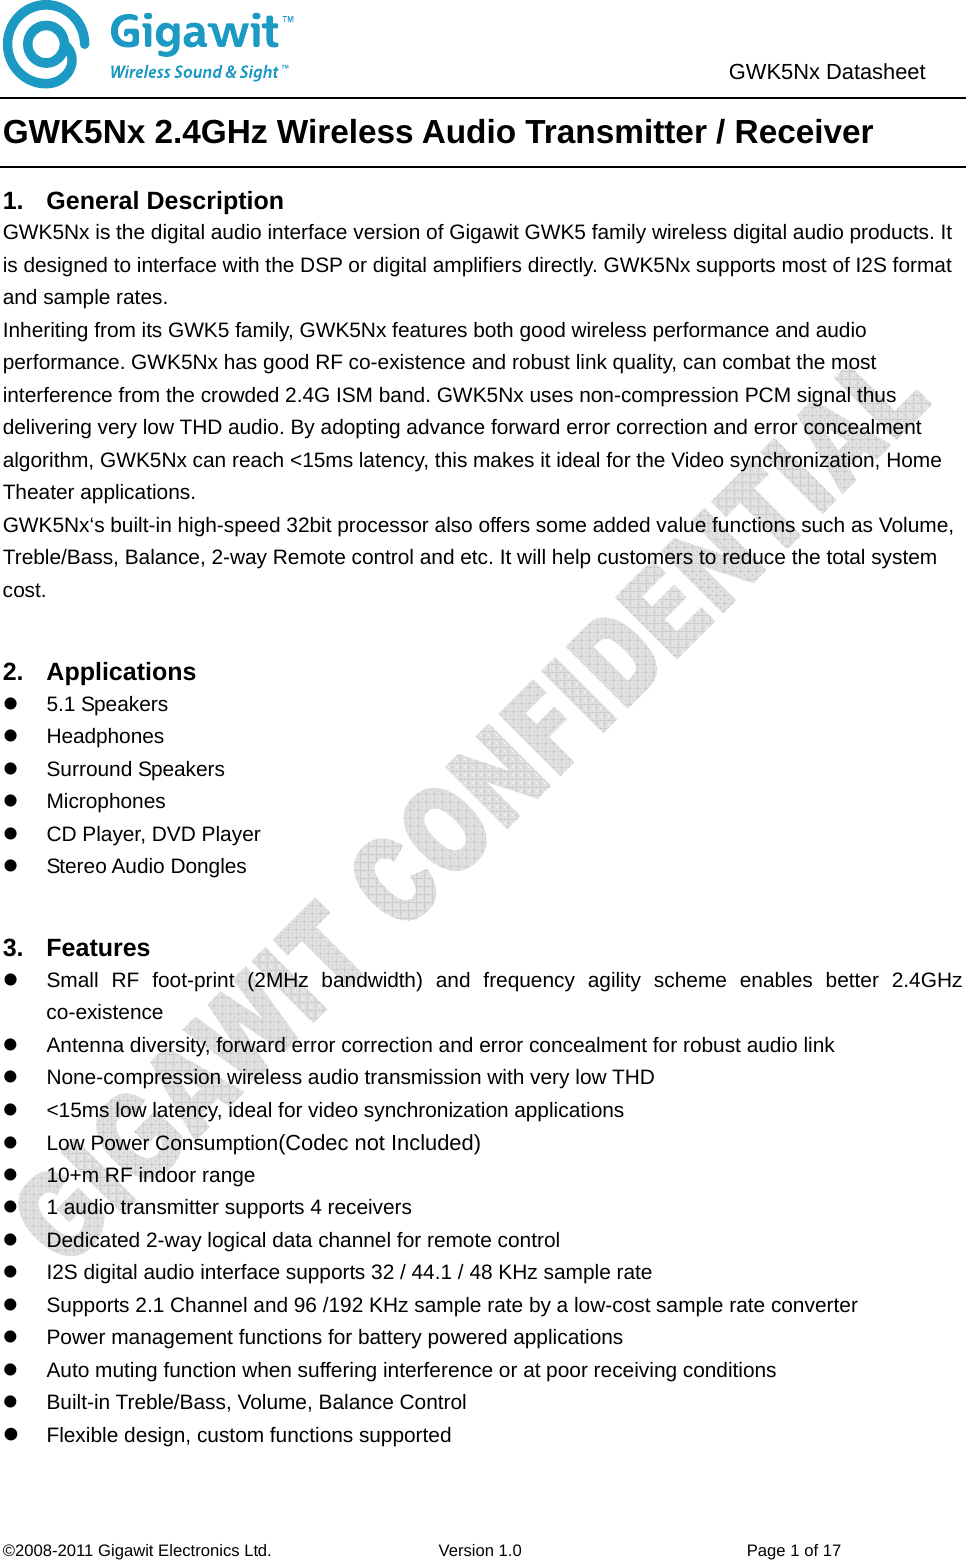                               ©2008-2011 Gigawit Electronics Ltd.                    Version 1.0                           Page 1 of 17  GWK5Nx Datasheet   GWK5Nx 2.4GHz Wireless Audio Transmitter / Receiver 1. General Description GWK5Nx is the digital audio interface version of Gigawit GWK5 family wireless digital audio products. It is designed to interface with the DSP or digital amplifiers directly. GWK5Nx supports most of I2S format and sample rates.   Inheriting from its GWK5 family, GWK5Nx features both good wireless performance and audio performance. GWK5Nx has good RF co-existence and robust link quality, can combat the most interference from the crowded 2.4G ISM band. GWK5Nx uses non-compression PCM signal thus delivering very low THD audio. By adopting advance forward error correction and error concealment algorithm, GWK5Nx can reach &lt;15ms latency, this makes it ideal for the Video synchronization, Home Theater applications.   GWK5Nx‘s built-in high-speed 32bit processor also offers some added value functions such as Volume, Treble/Bass, Balance, 2-way Remote control and etc. It will help customers to reduce the total system cost.  2. Applications  z 5.1 Speakers z Headphones z Surround Speakers z Microphones z  CD Player, DVD Player z Stereo Audio Dongles   3. Features z  Small RF foot-print (2MHz bandwidth) and frequency agility scheme enables better 2.4GHz co-existence z  Antenna diversity, forward error correction and error concealment for robust audio link z  None-compression wireless audio transmission with very low THD z  &lt;15ms low latency, ideal for video synchronization applications z  Low Power Consumption(Codec not Included) z  10+m RF indoor range   z  1 audio transmitter supports 4 receivers z  Dedicated 2-way logical data channel for remote control z  I2S digital audio interface supports 32 / 44.1 / 48 KHz sample rate   z  Supports 2.1 Channel and 96 /192 KHz sample rate by a low-cost sample rate converter z  Power management functions for battery powered applications z  Auto muting function when suffering interference or at poor receiving conditions z  Built-in Treble/Bass, Volume, Balance Control z Flexible design, custom functions supported 